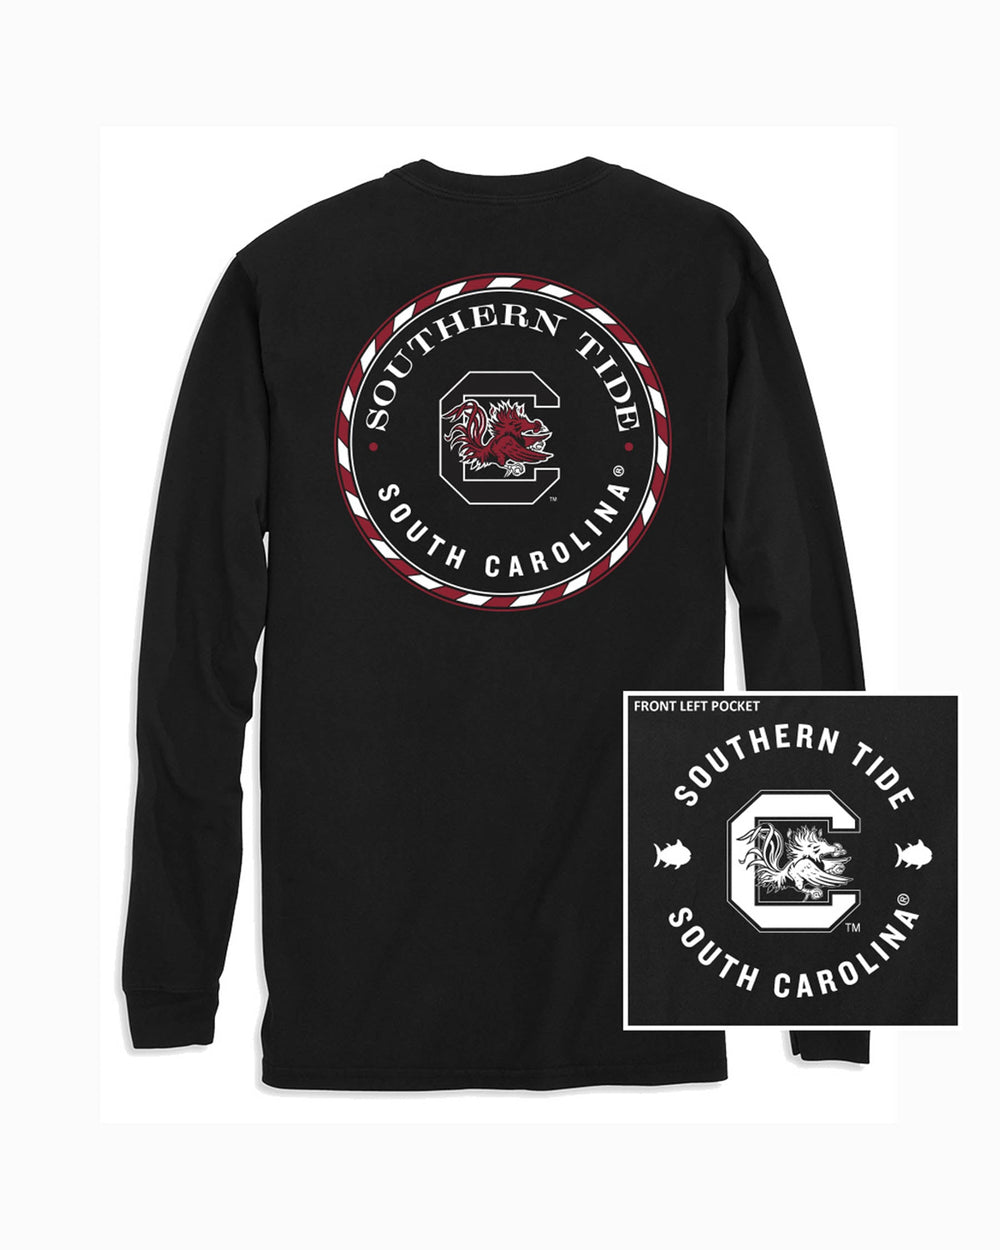 The front of the USC Gamecocks Long Sleeve Medallion Logo T-Shirt by Southern Tide - Black